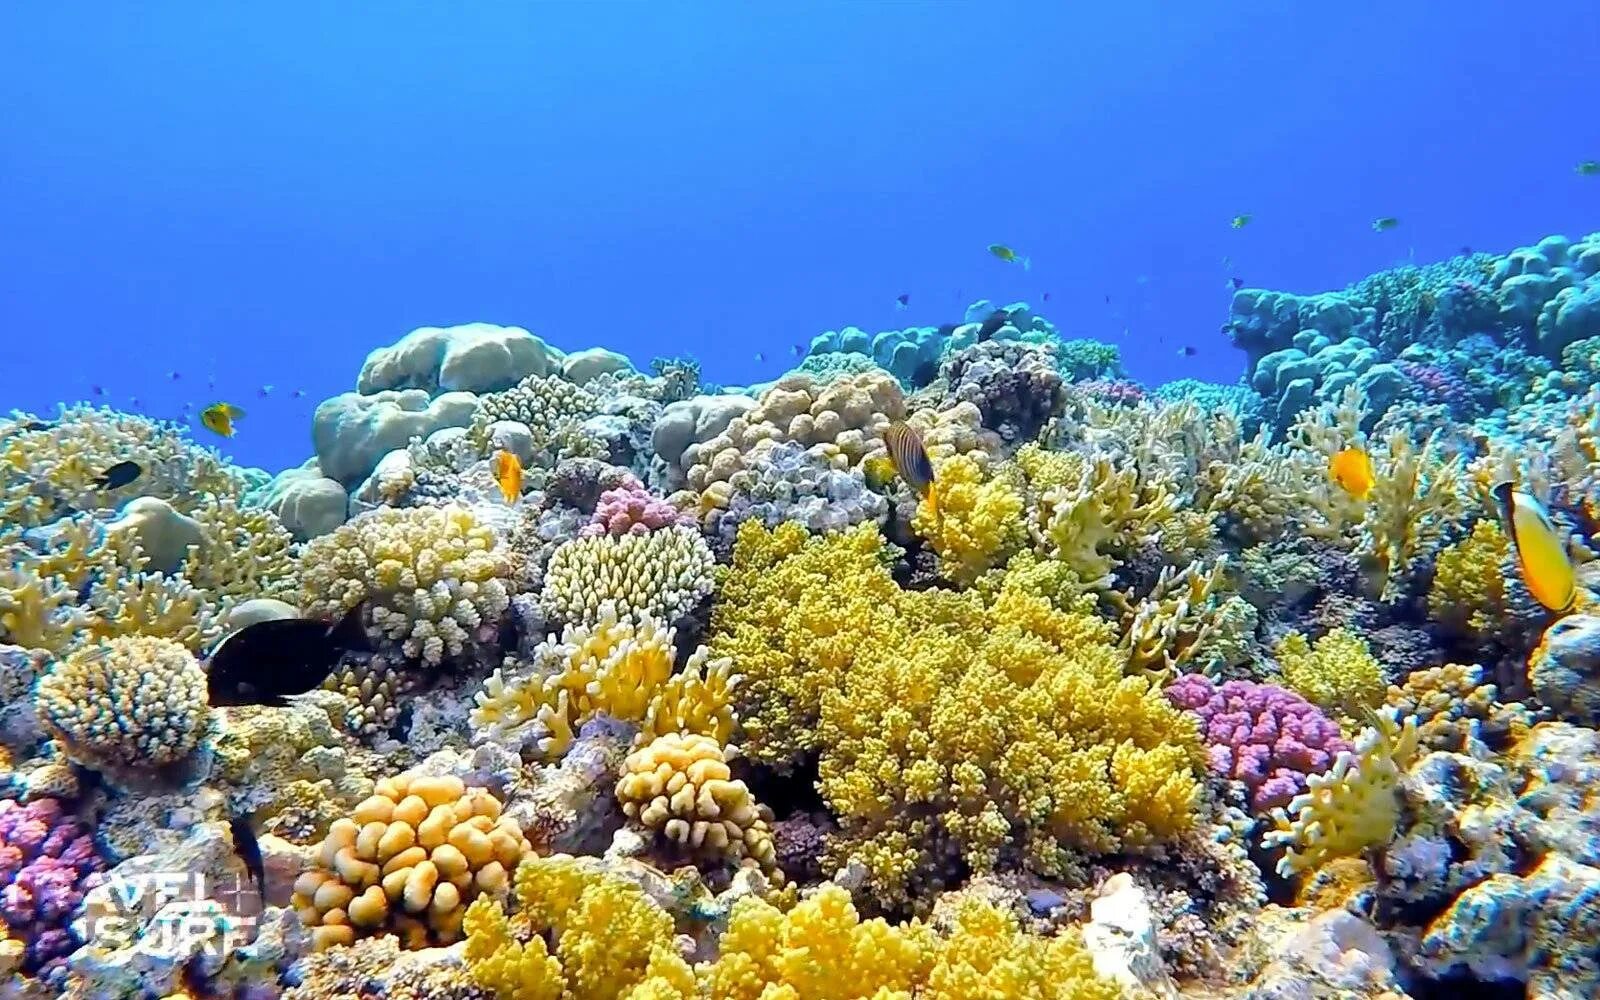 Great coral reef